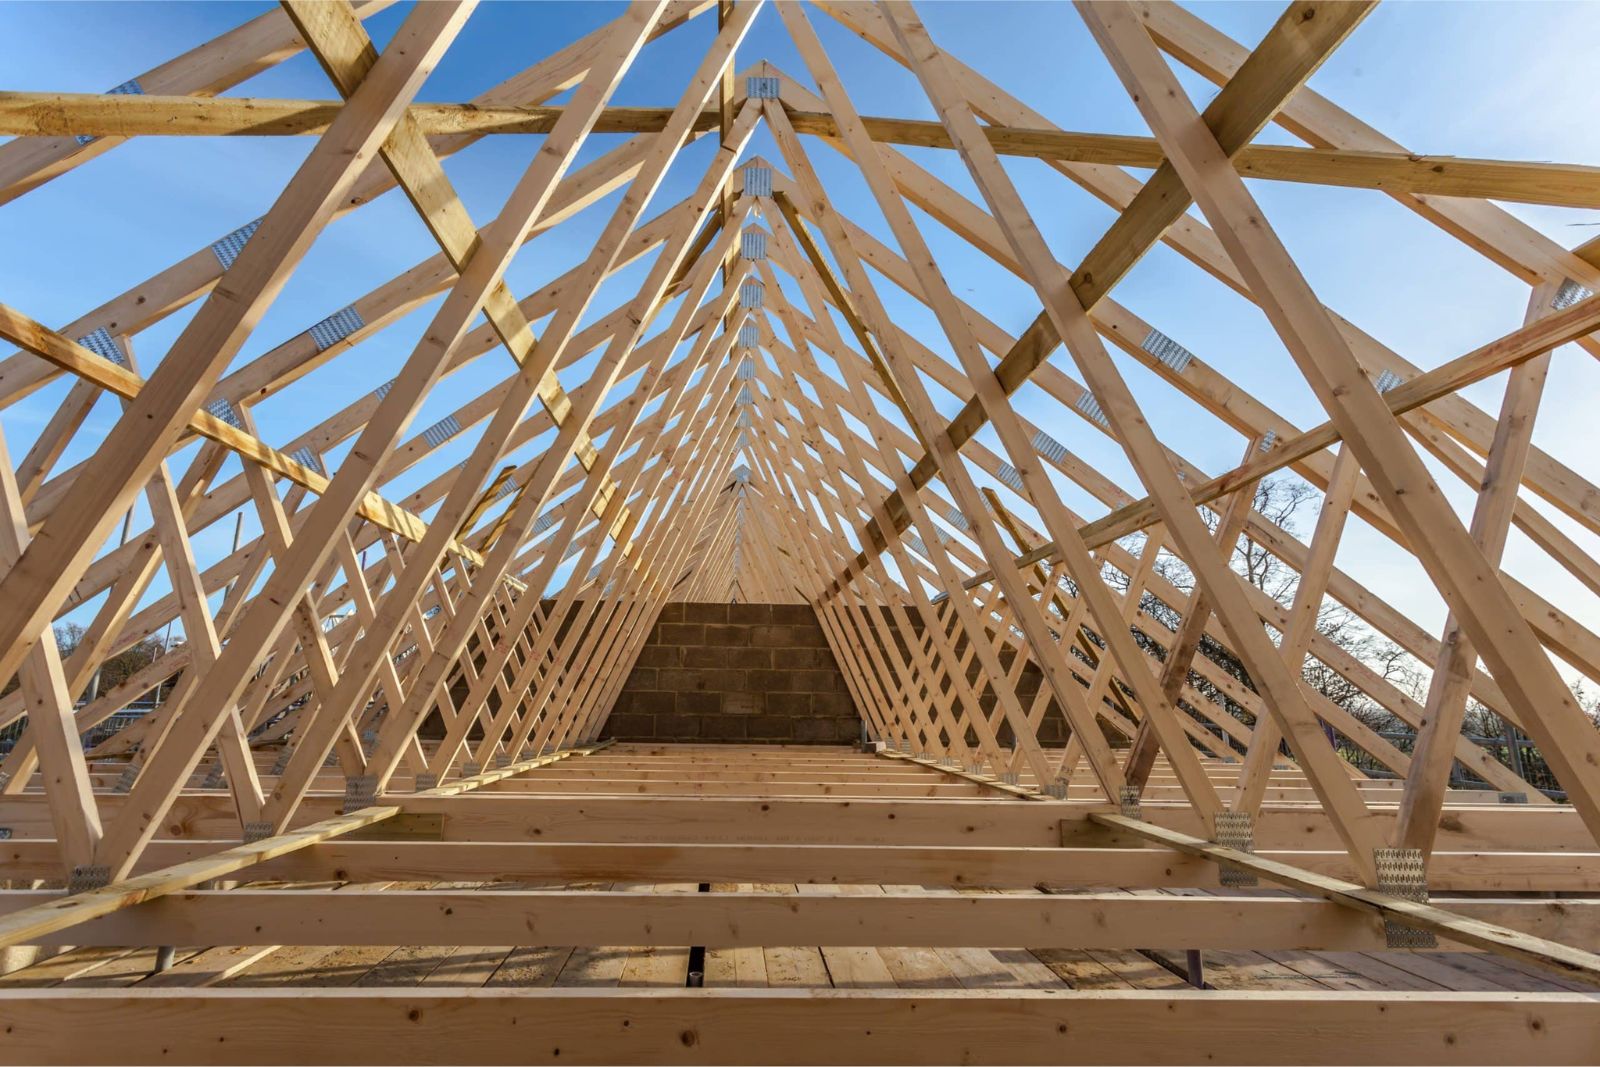 The Advantages of Roof Trusses: Strength, Efficiency, and Versatility